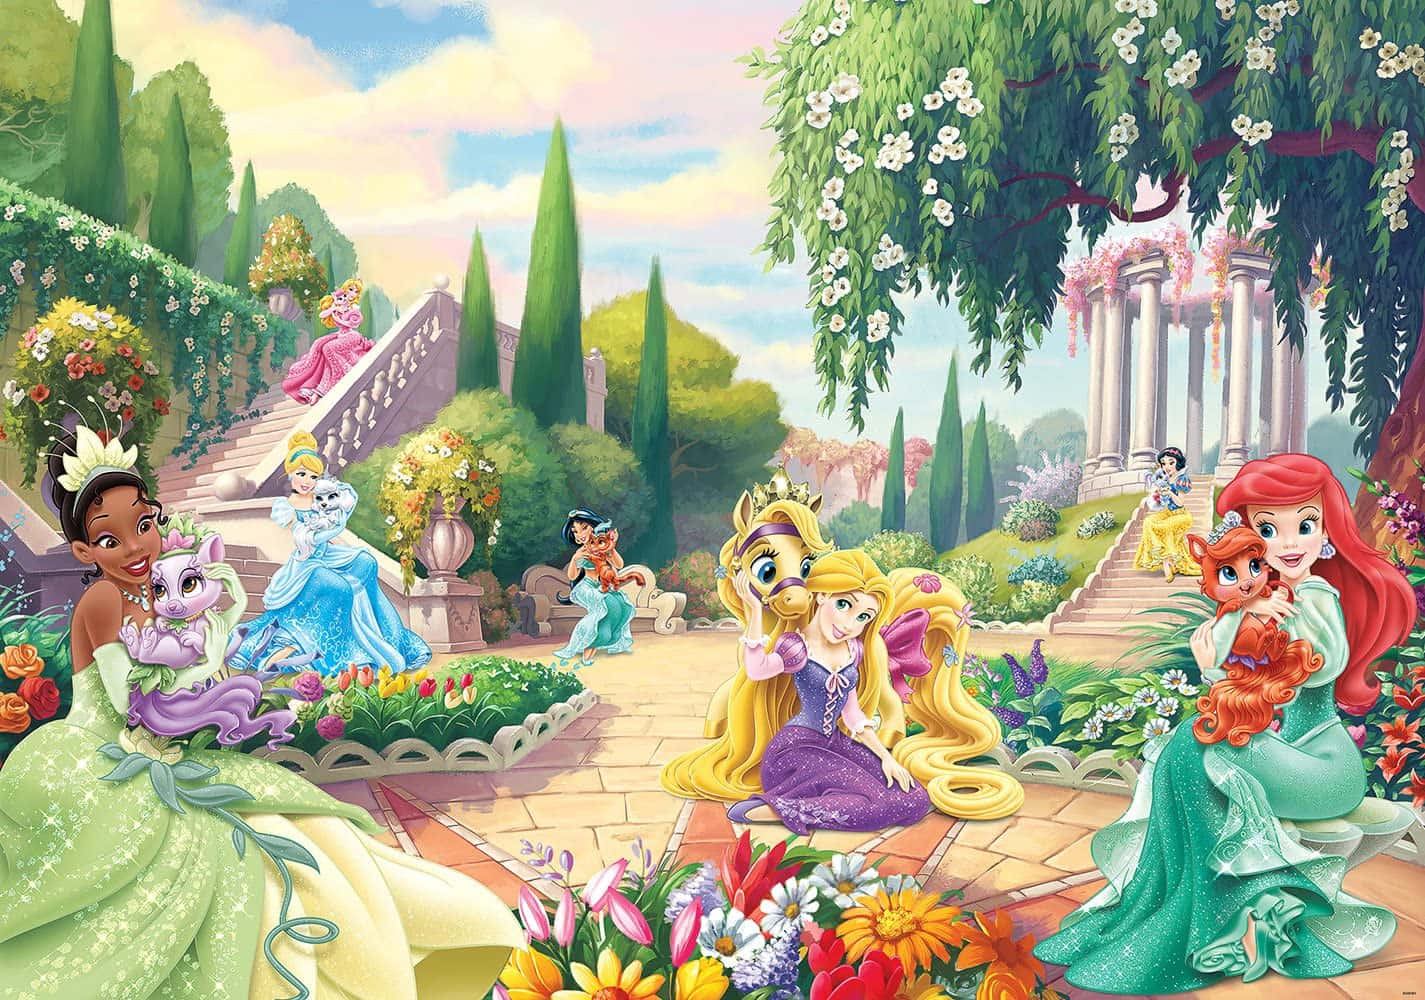 100+] The Princess And The Frog Wallpapers